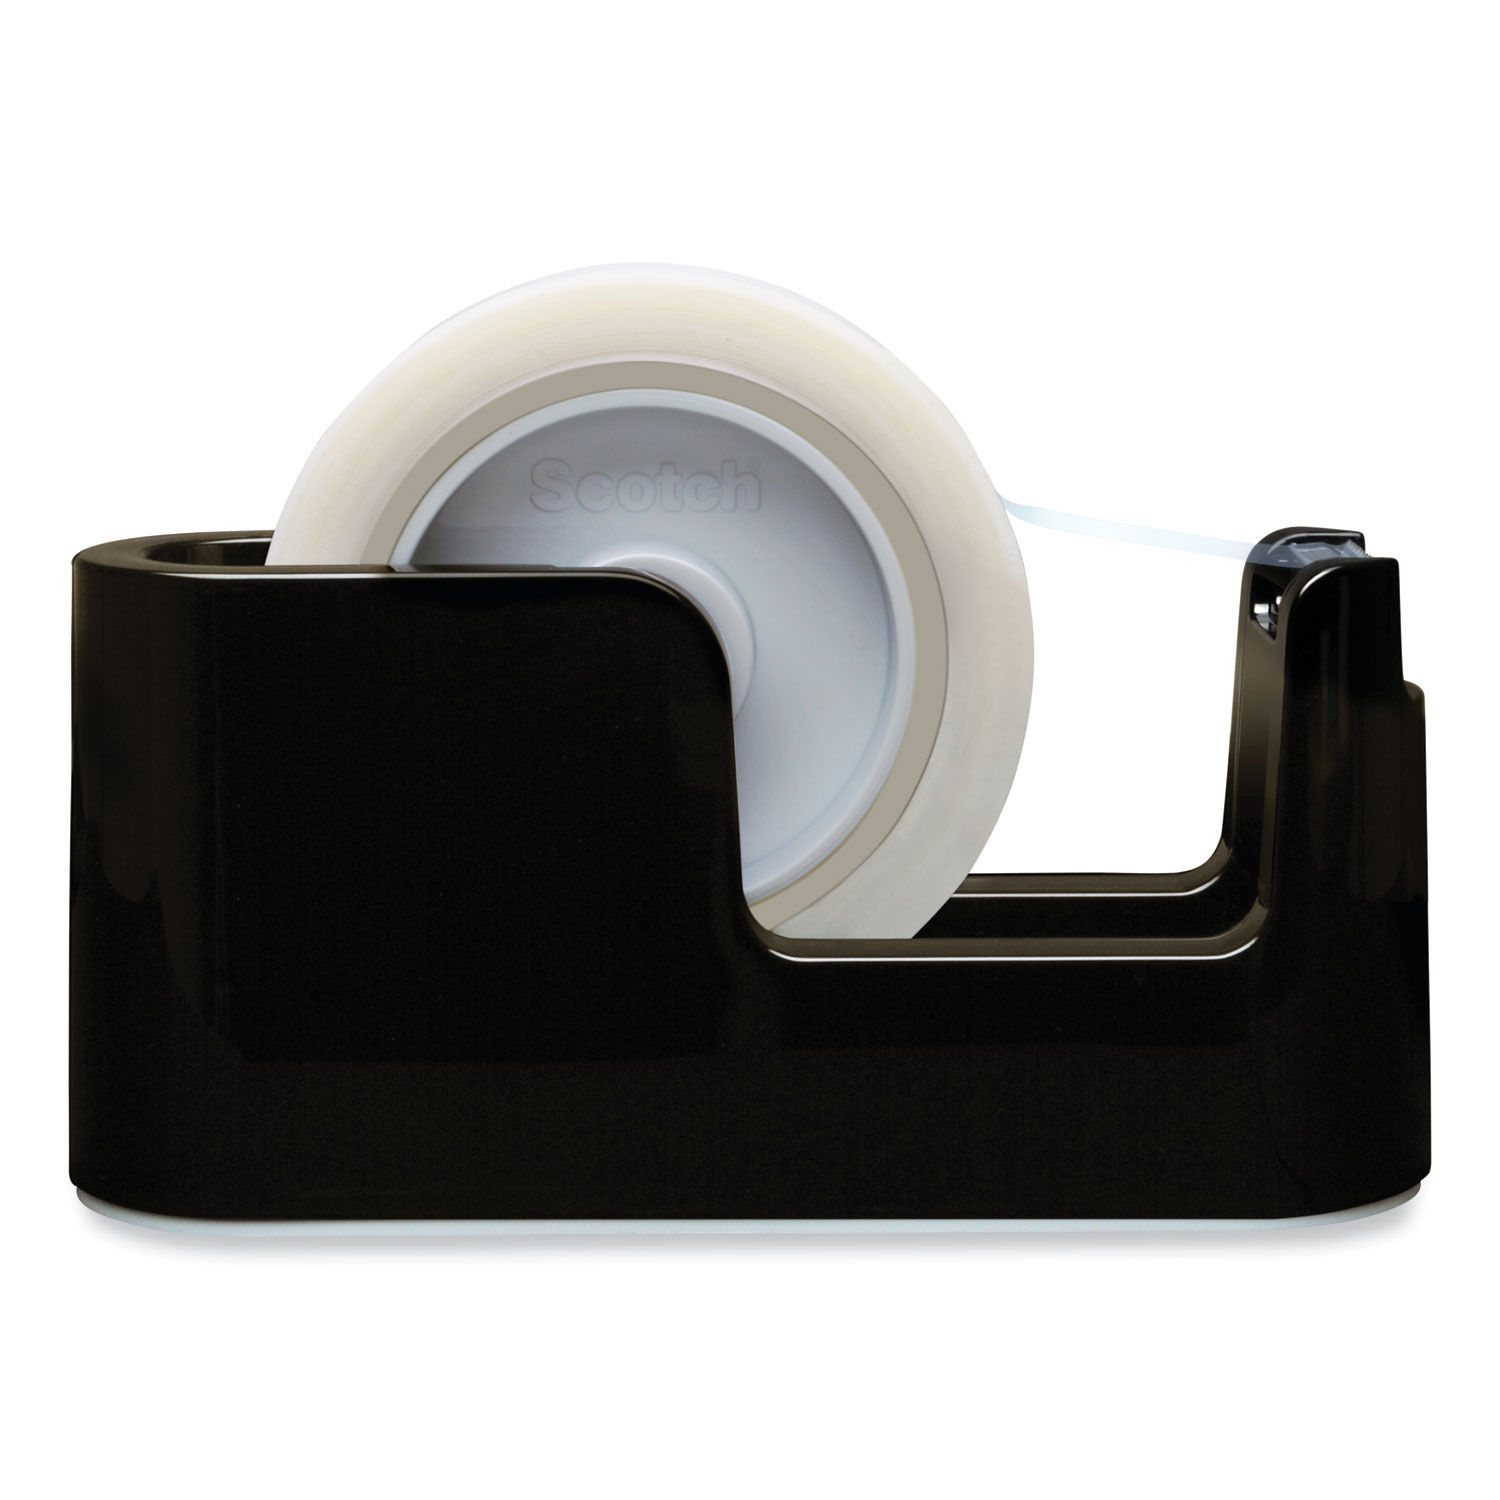 24 mm masking tape dispenser with magnetic mount by fns720